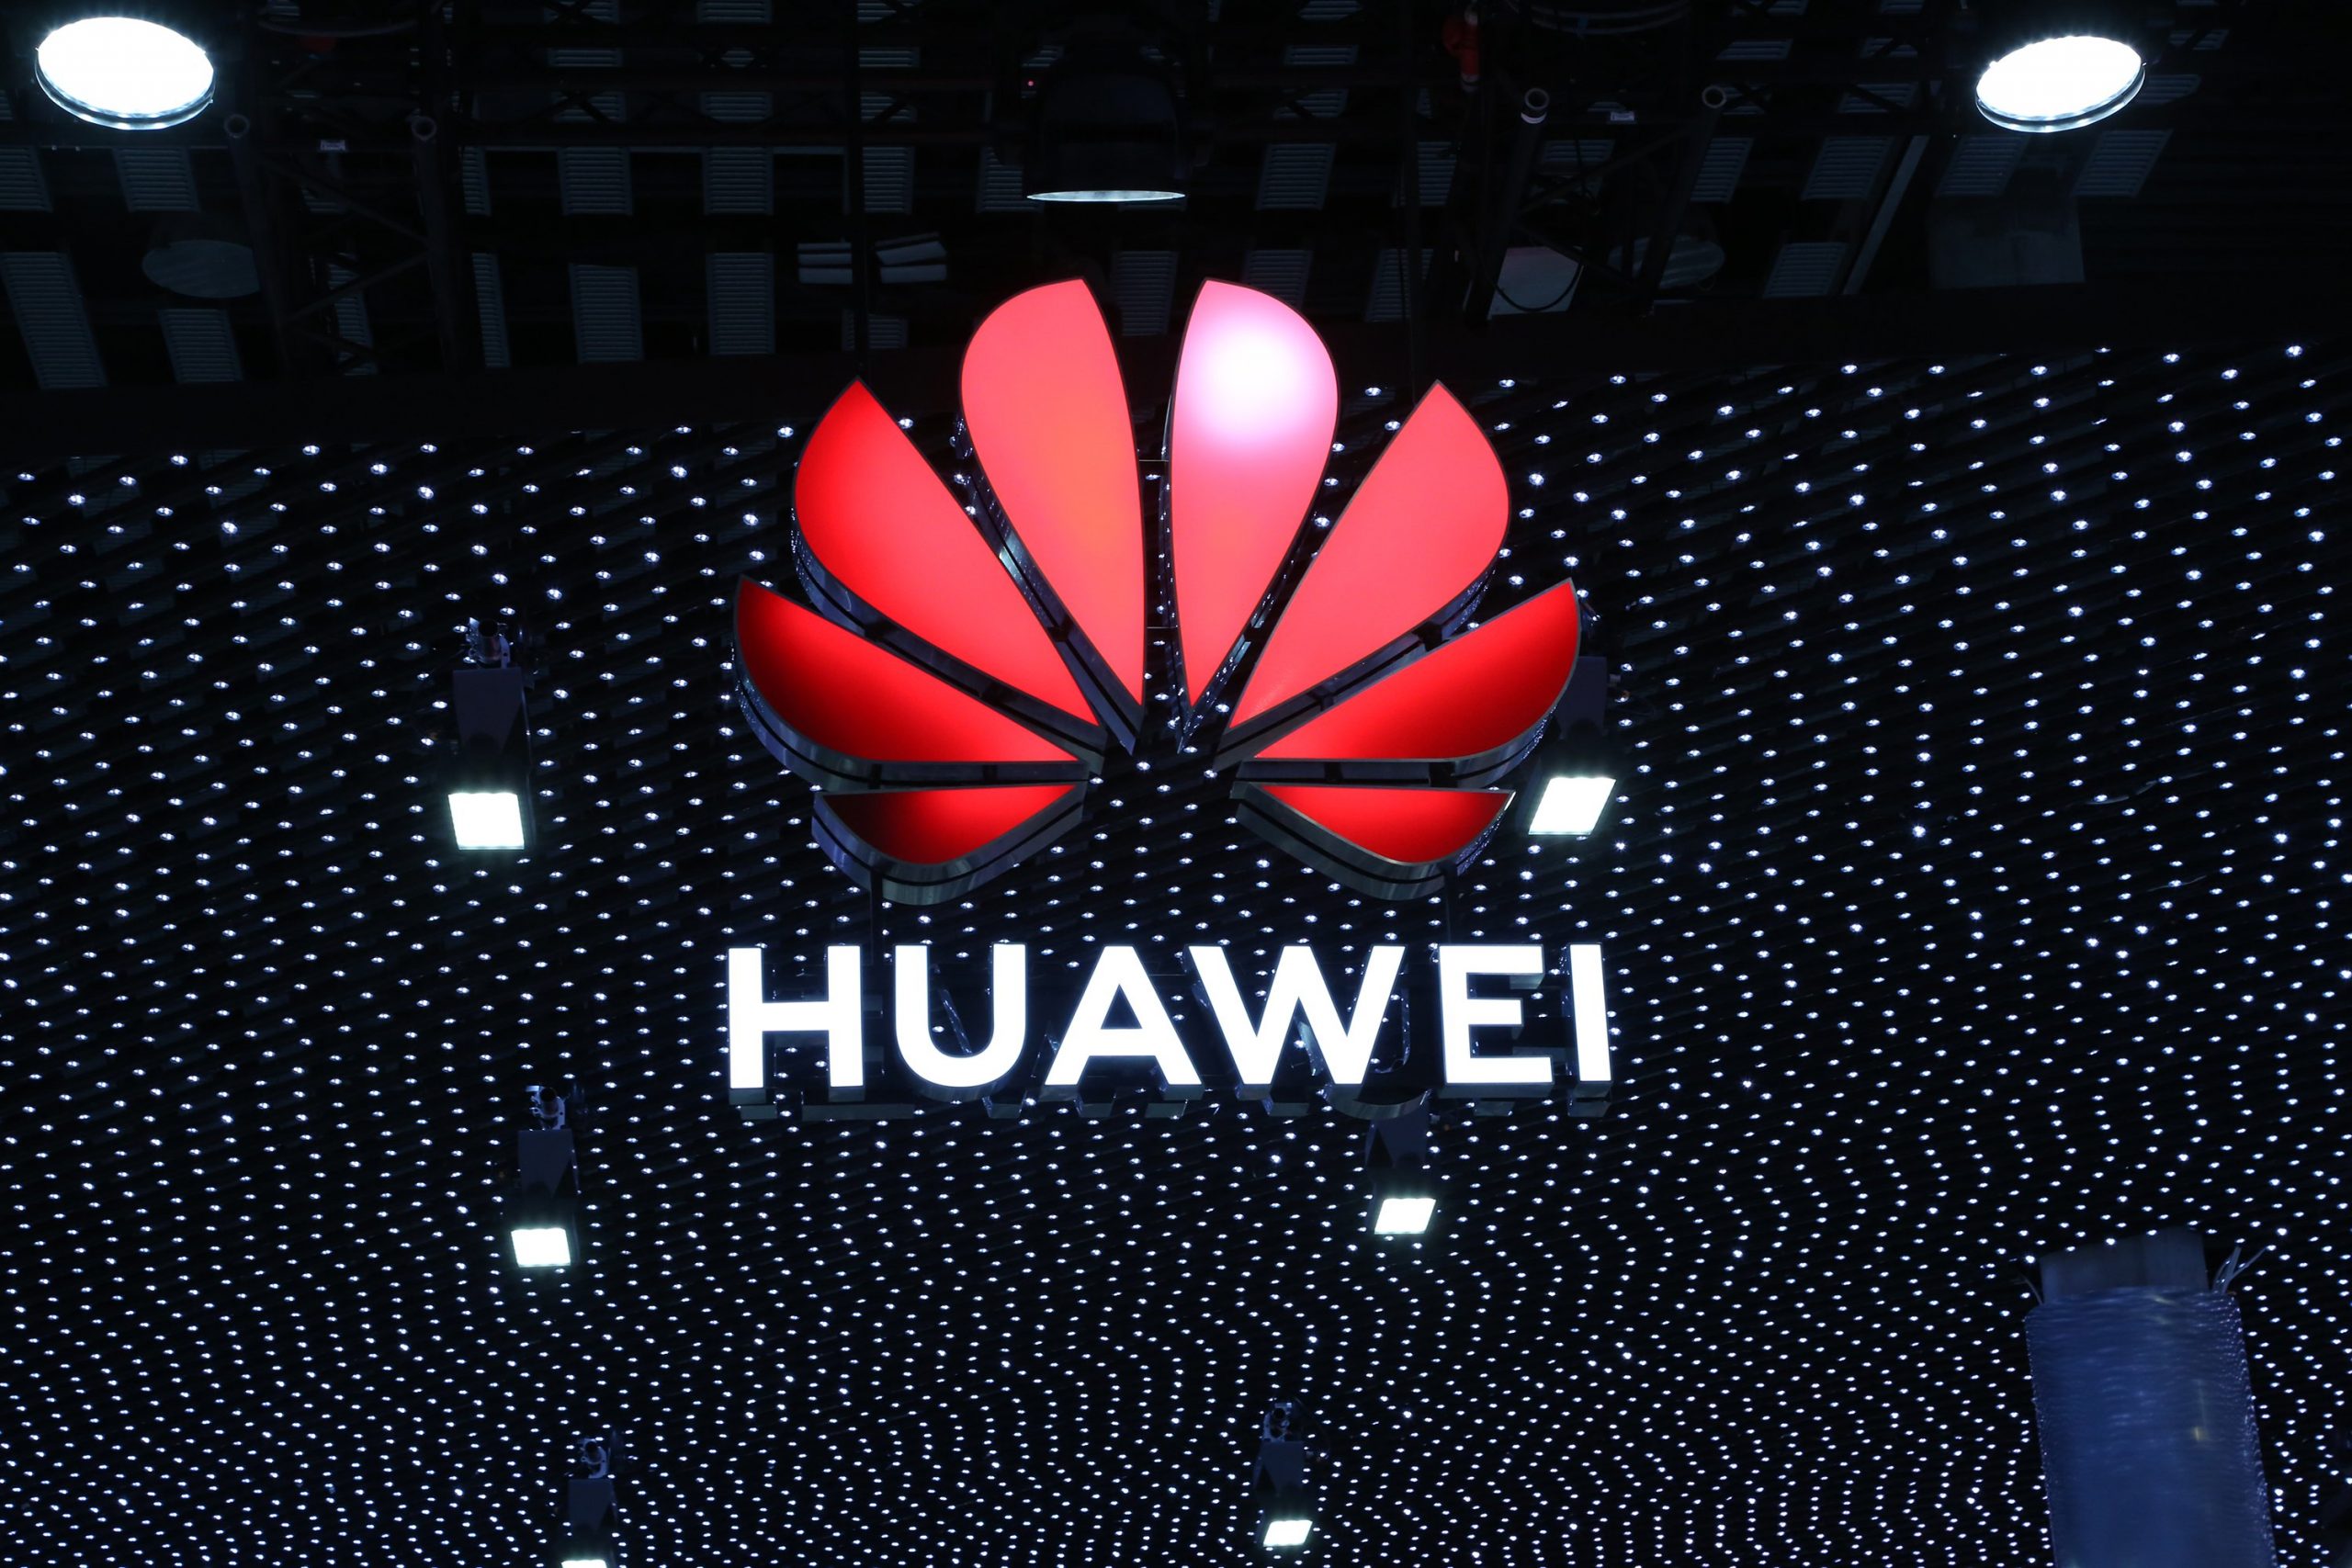 Huawei must focus on strategic areas and downscale enterprise operations: Founder